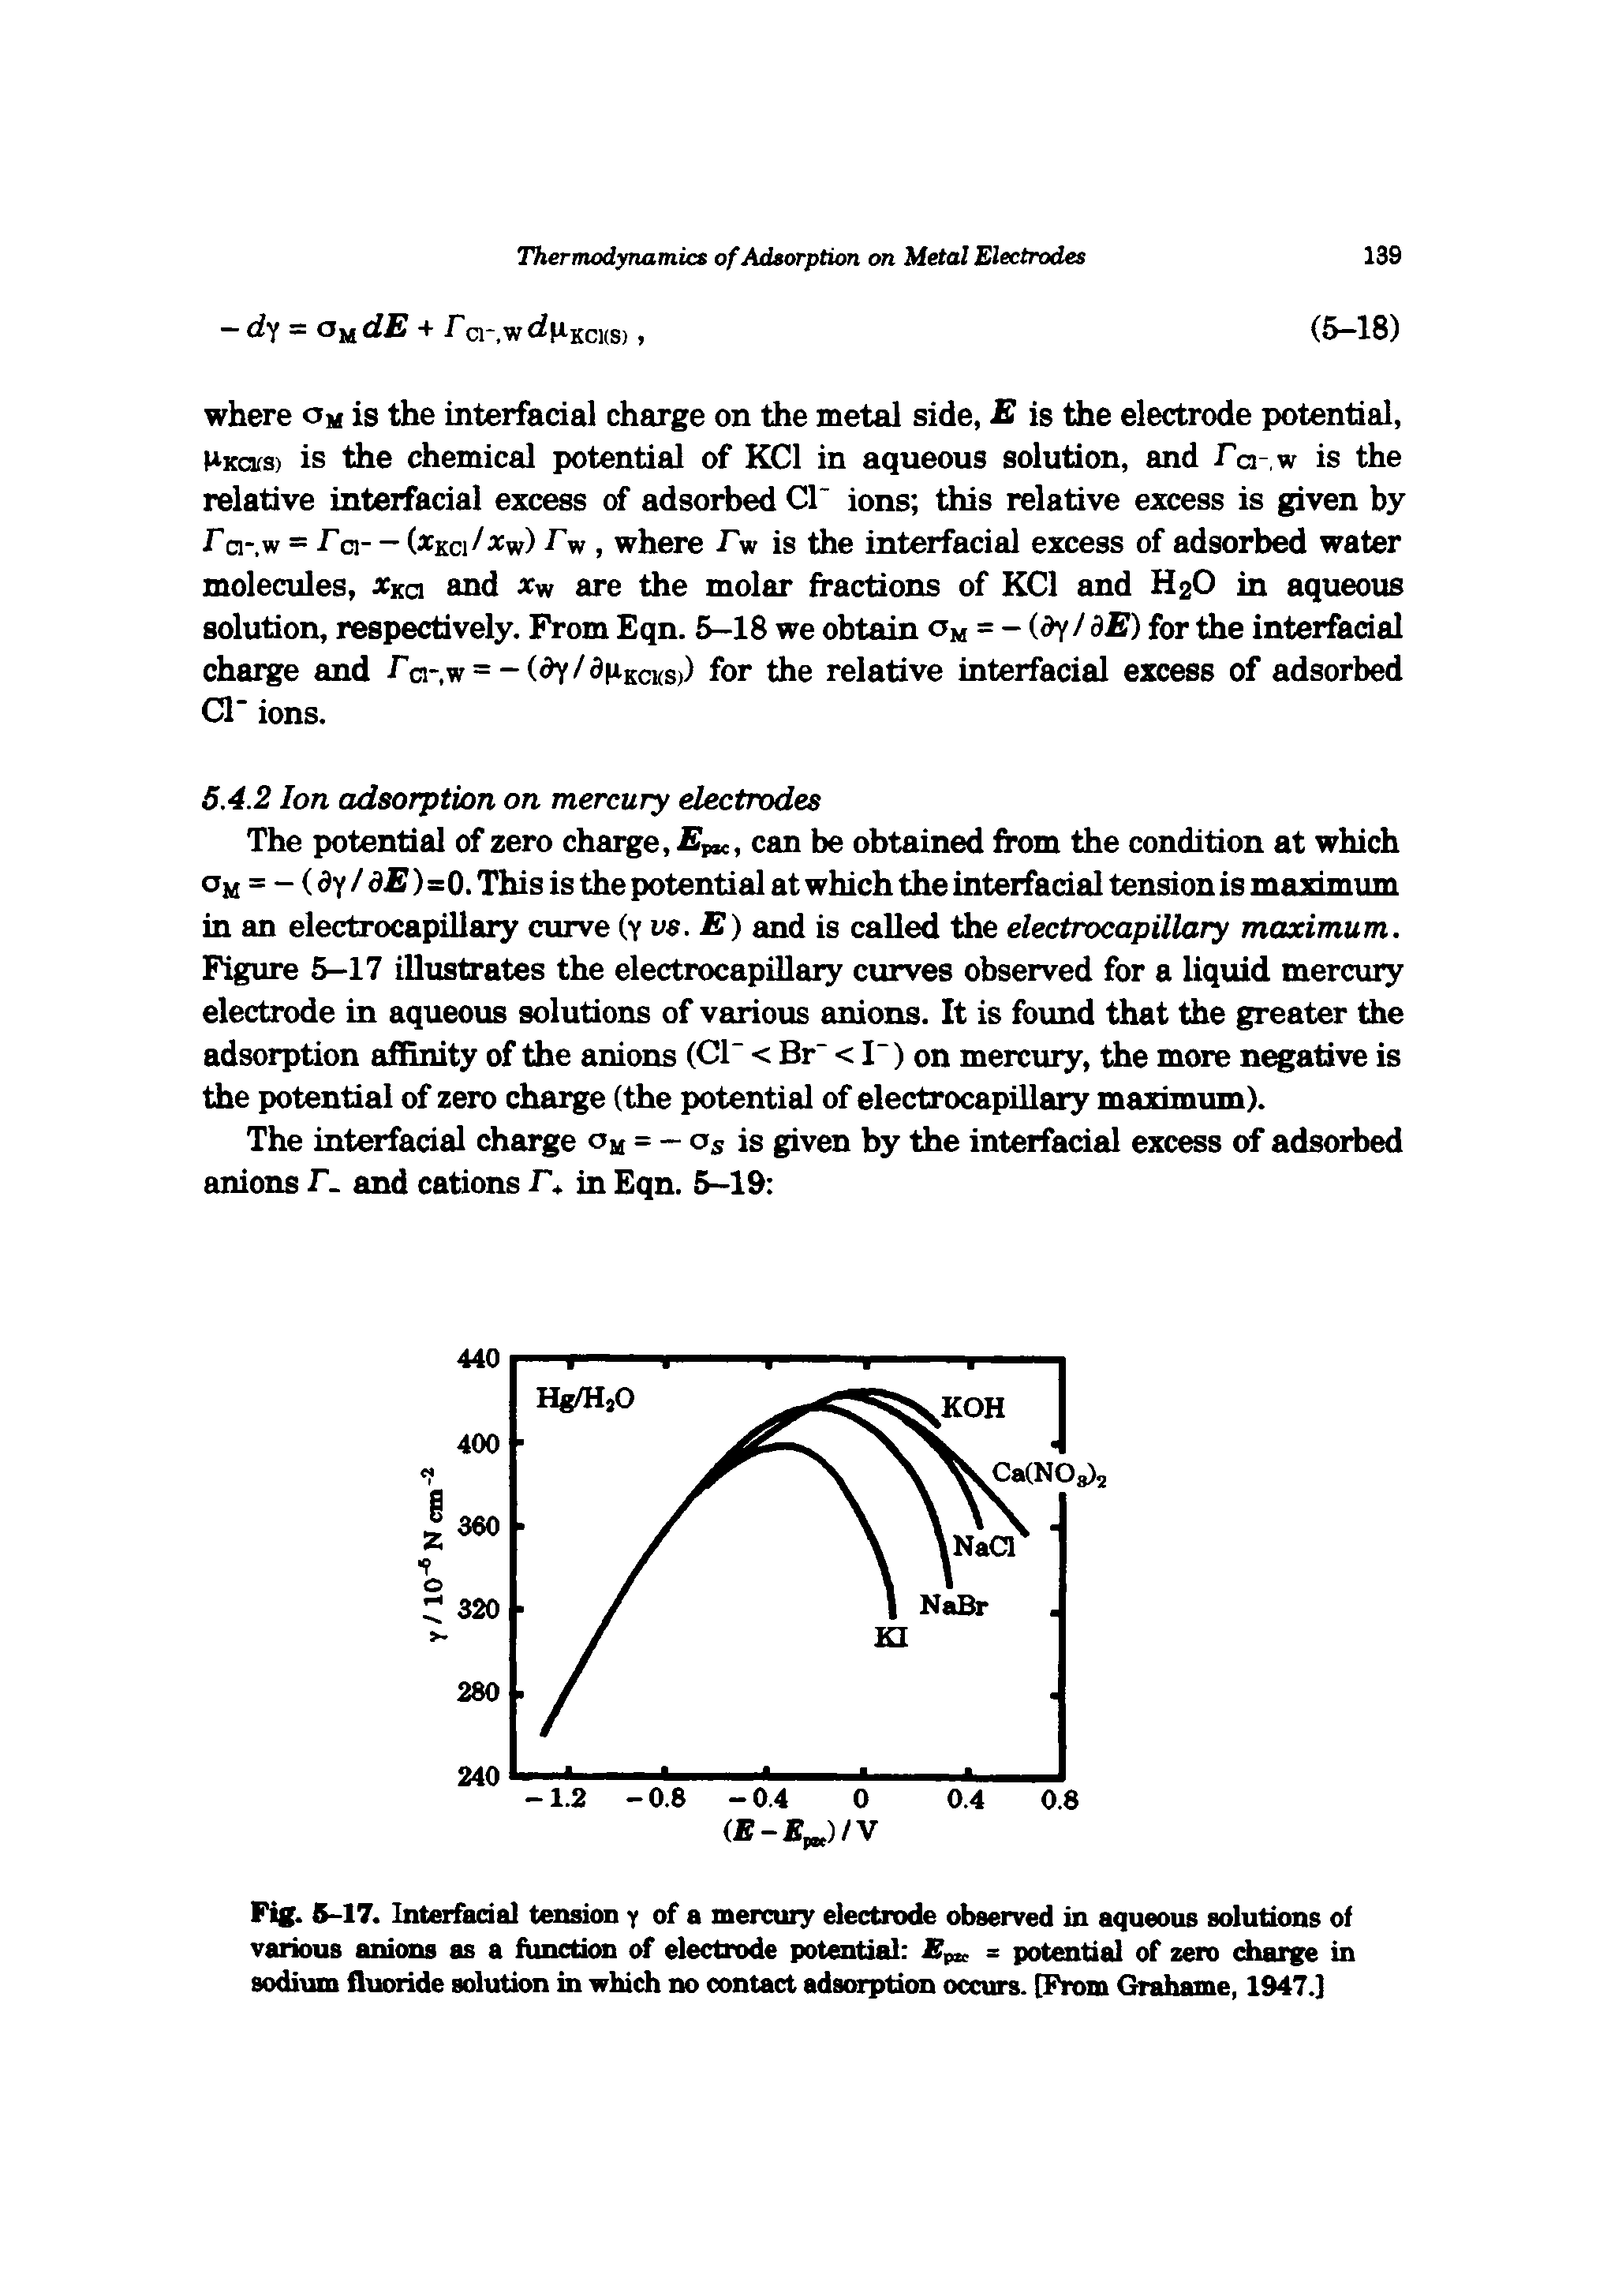 Fig. 5-17. Interfacial tension y of a mercury electrode observed in aqueous solutions of various anions as a function of electrode potential pu = potential of zero diarge in sodium fluoride solution in which no contact adsorption occurs. [From Grahame, 1947.]...